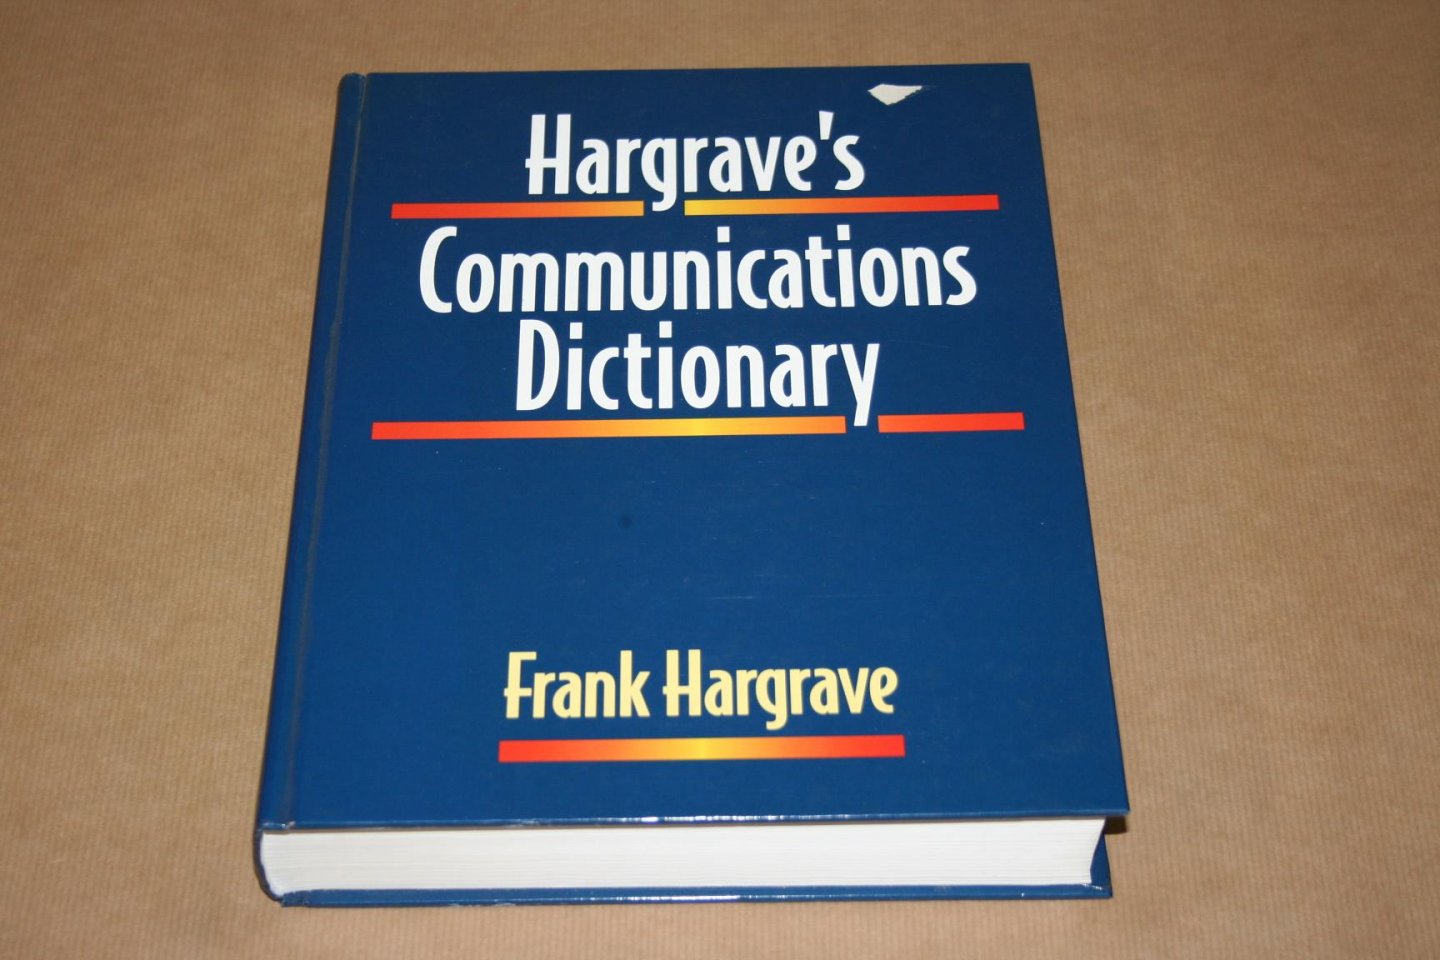 Frank Hargrave - Hargrave's Communications Dictionary